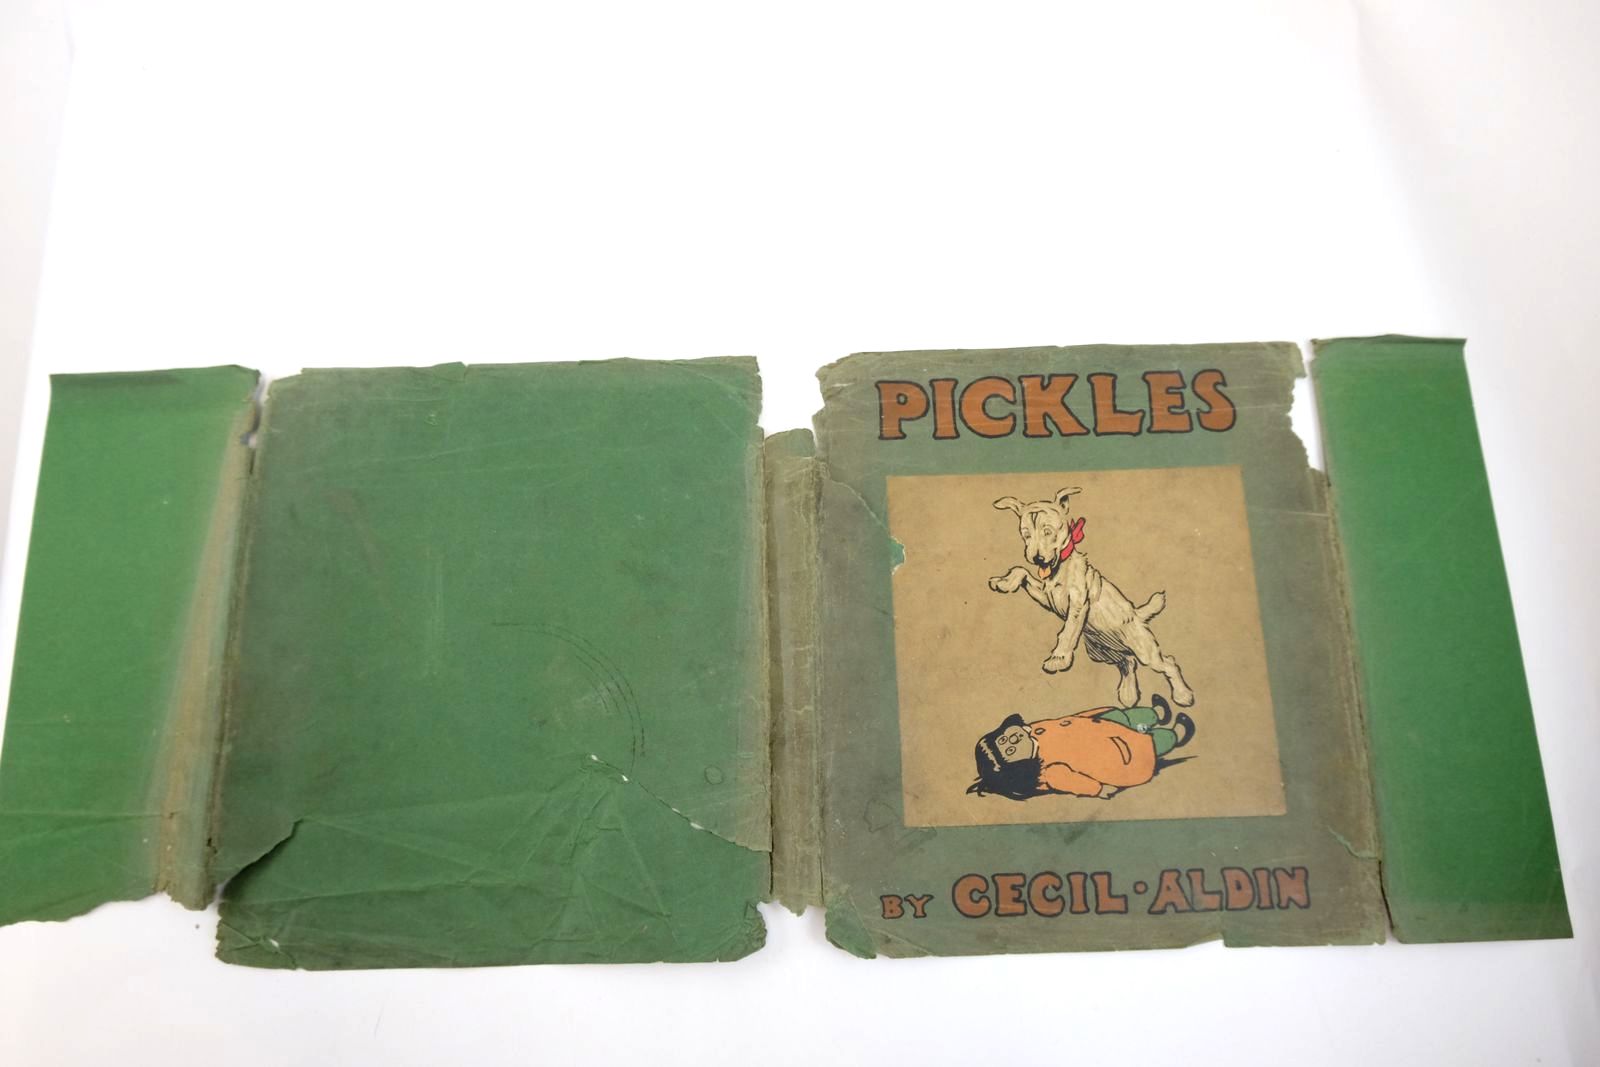 Photo of PICKLES written by Aldin, Cecil illustrated by Aldin, Cecil published by Henry Frowde, Hodder & Stoughton (STOCK CODE: 2133295)  for sale by Stella & Rose's Books